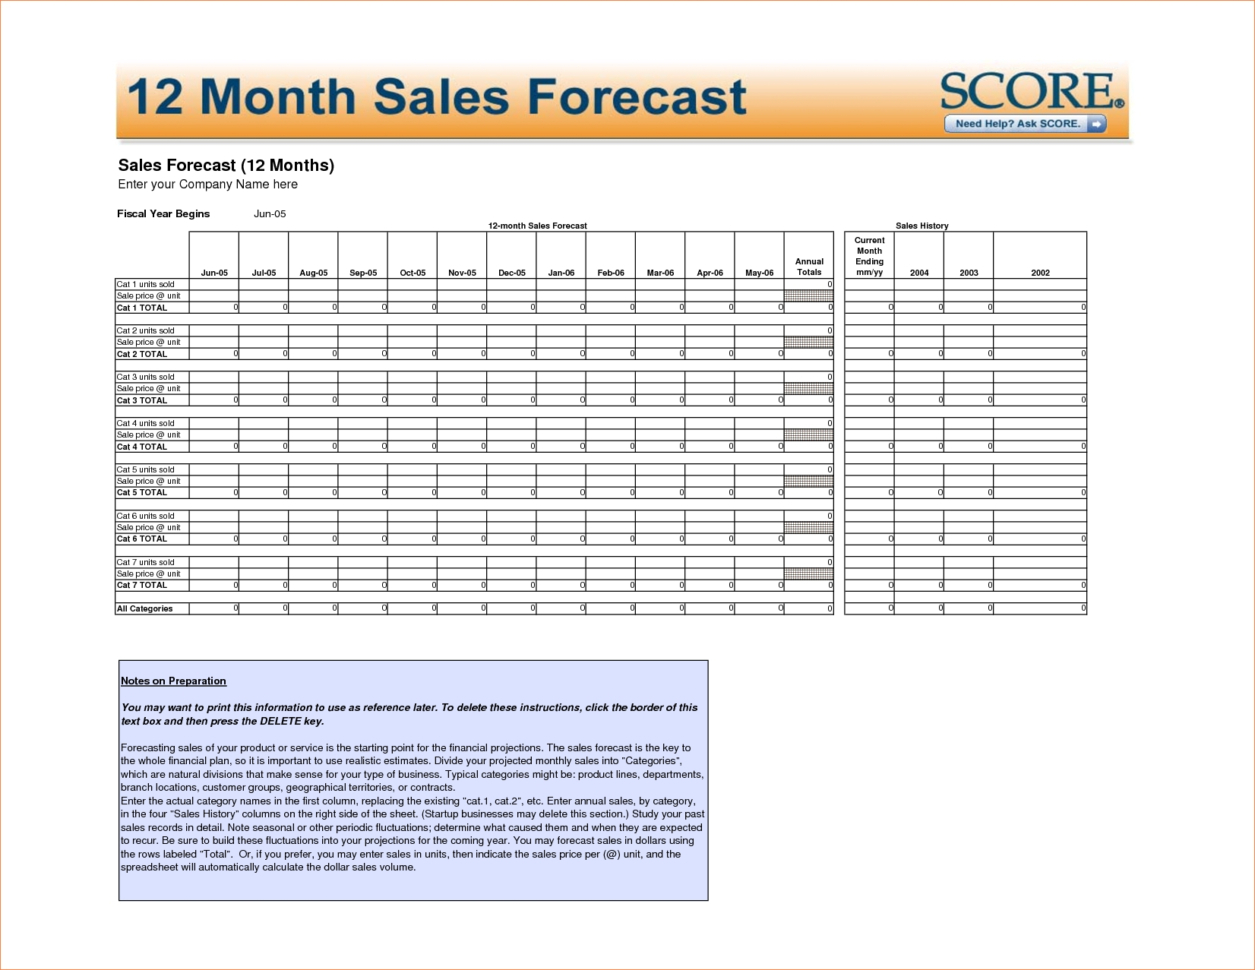 Score Sales Forecast Spreadsheet With Month Financial Projection Template Sales Forecast Spreadsheet